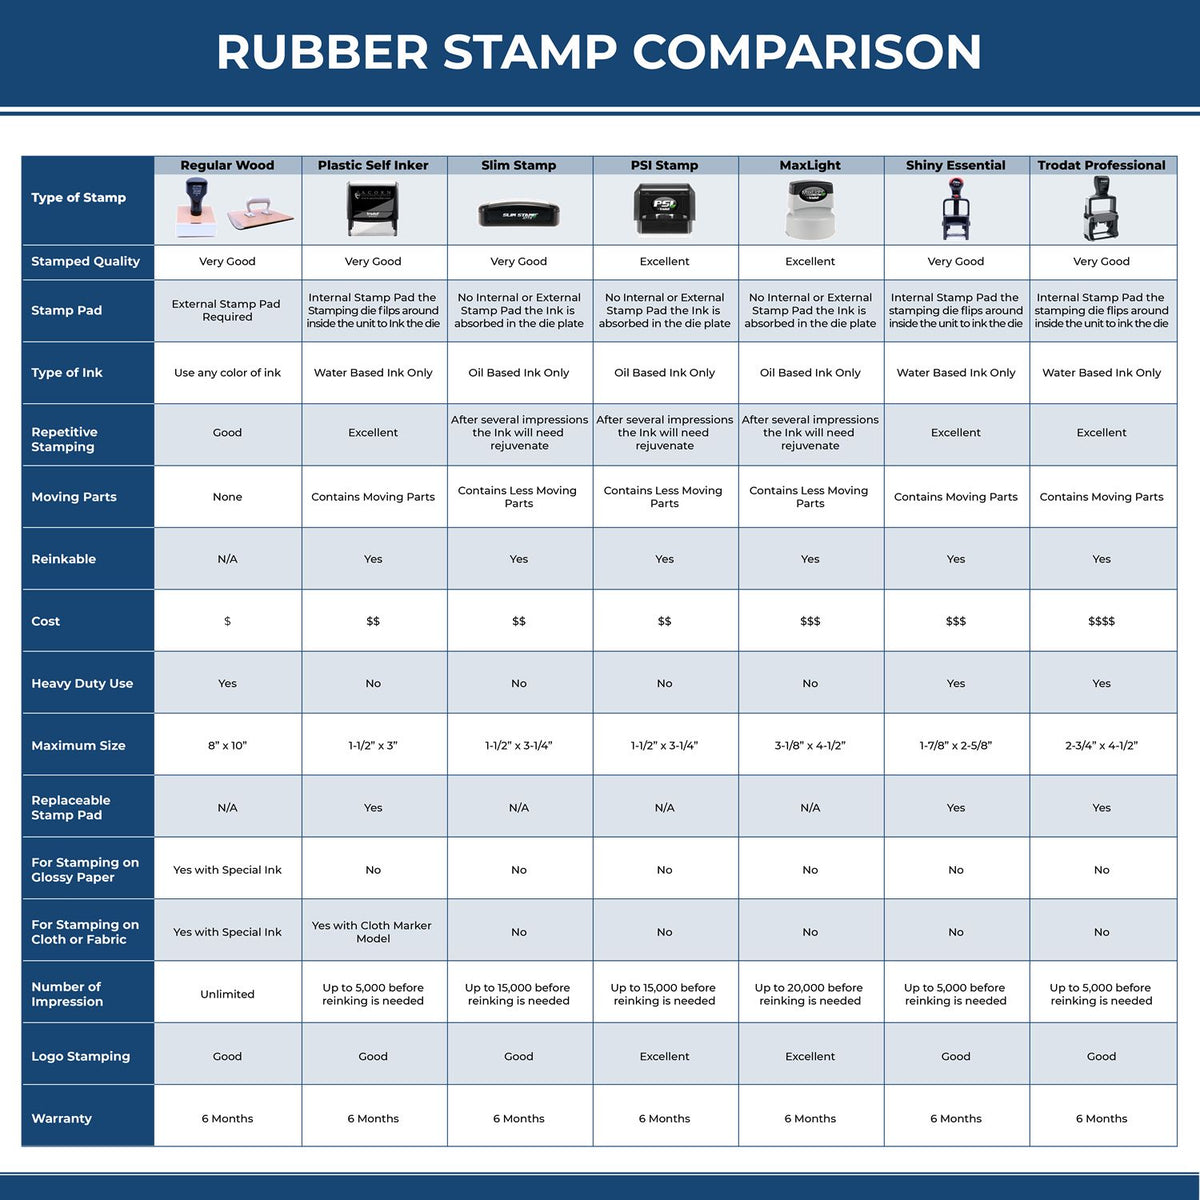 A comparison chart for the different types of mount models available for the Premium MaxLight Pre-Inked Washington Landscape Architectural Stamp.